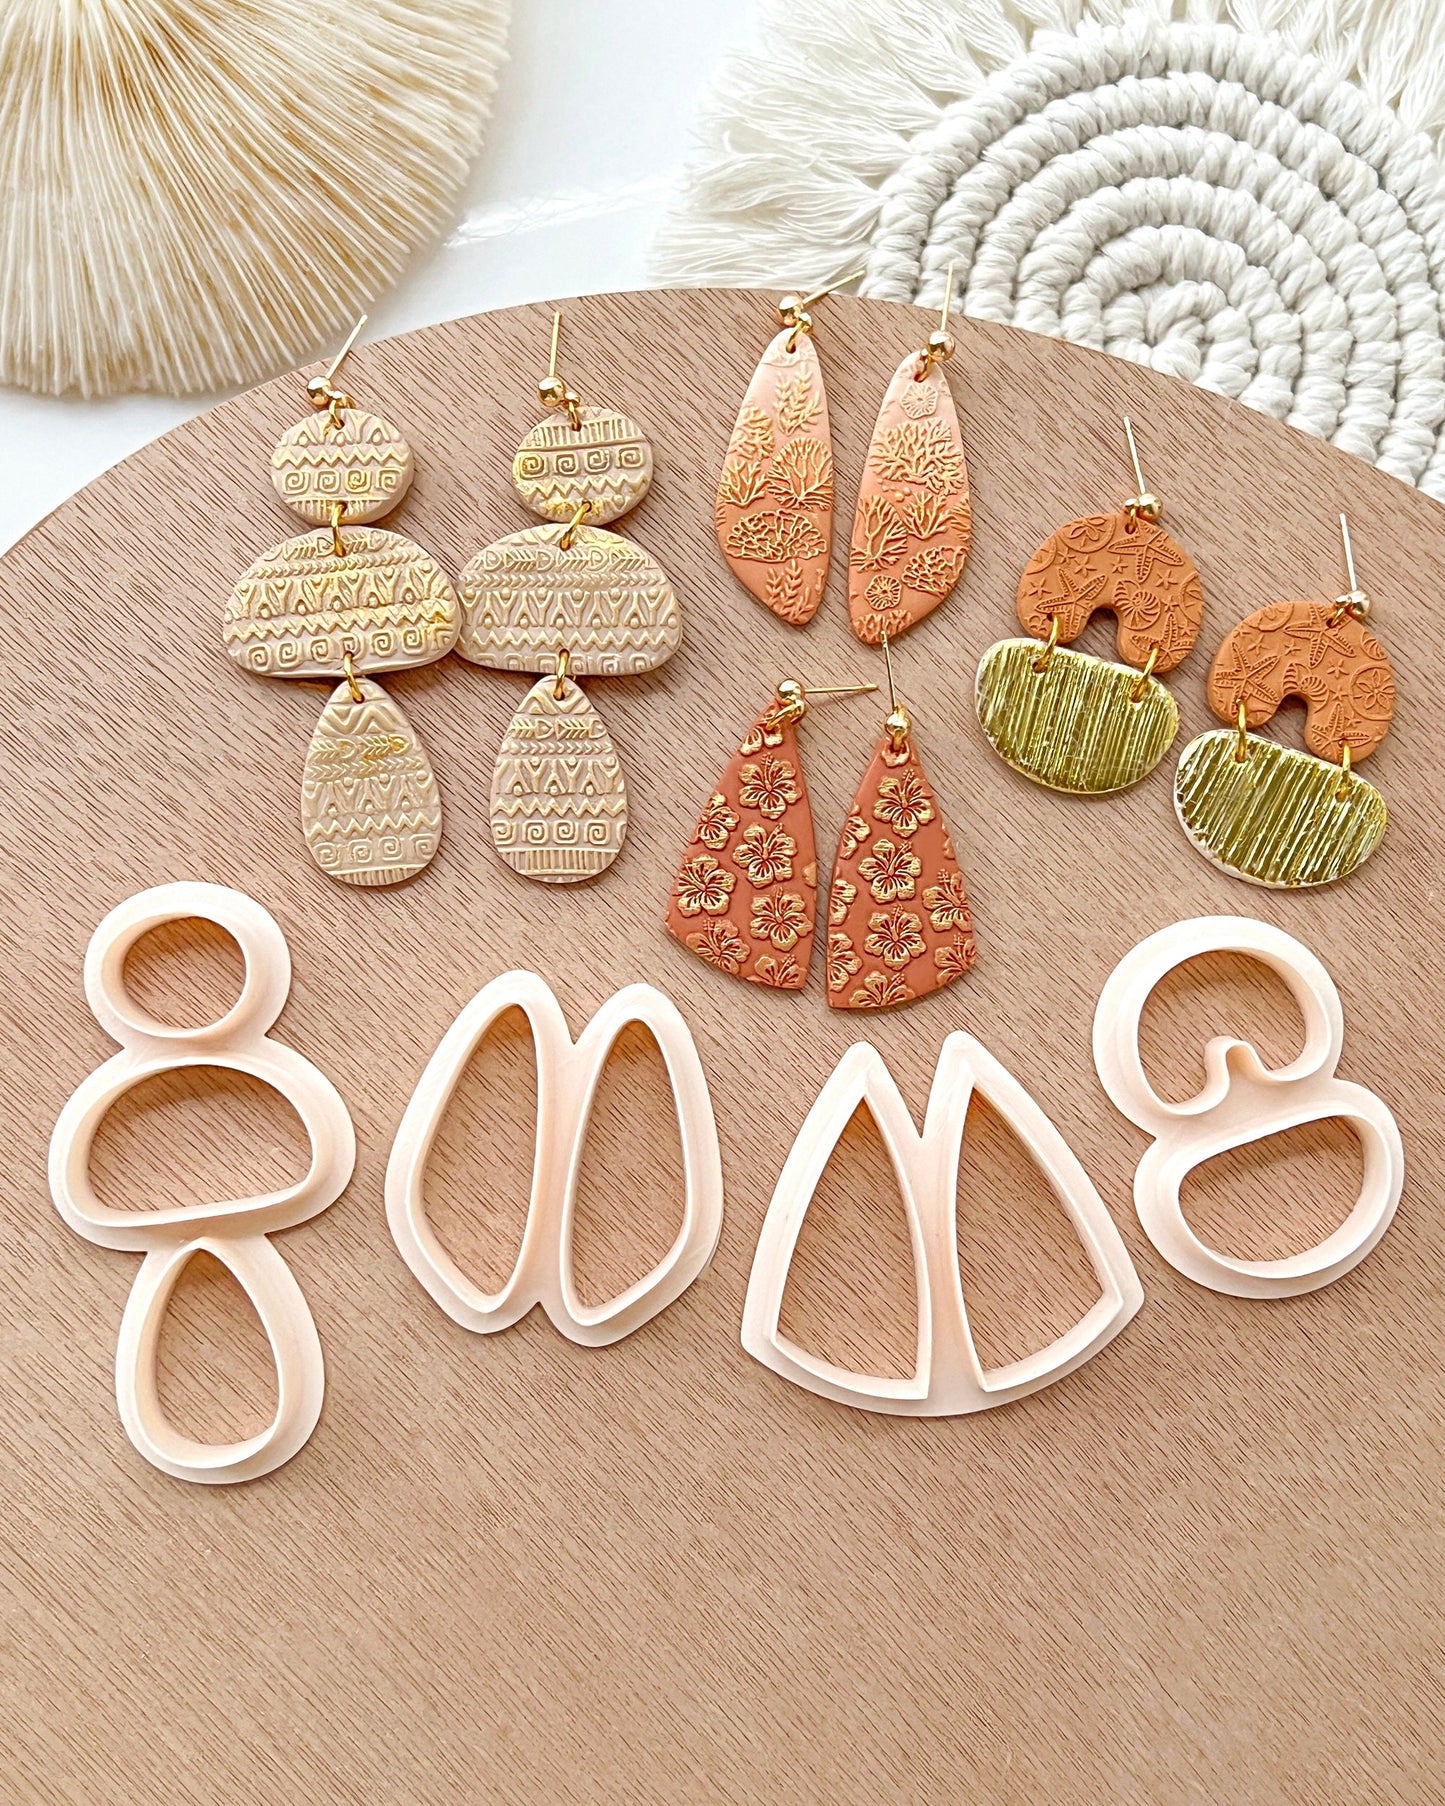 Must Have! Polymer Clay Cutters | Clay Earring Cutters Set for Jewelry Making